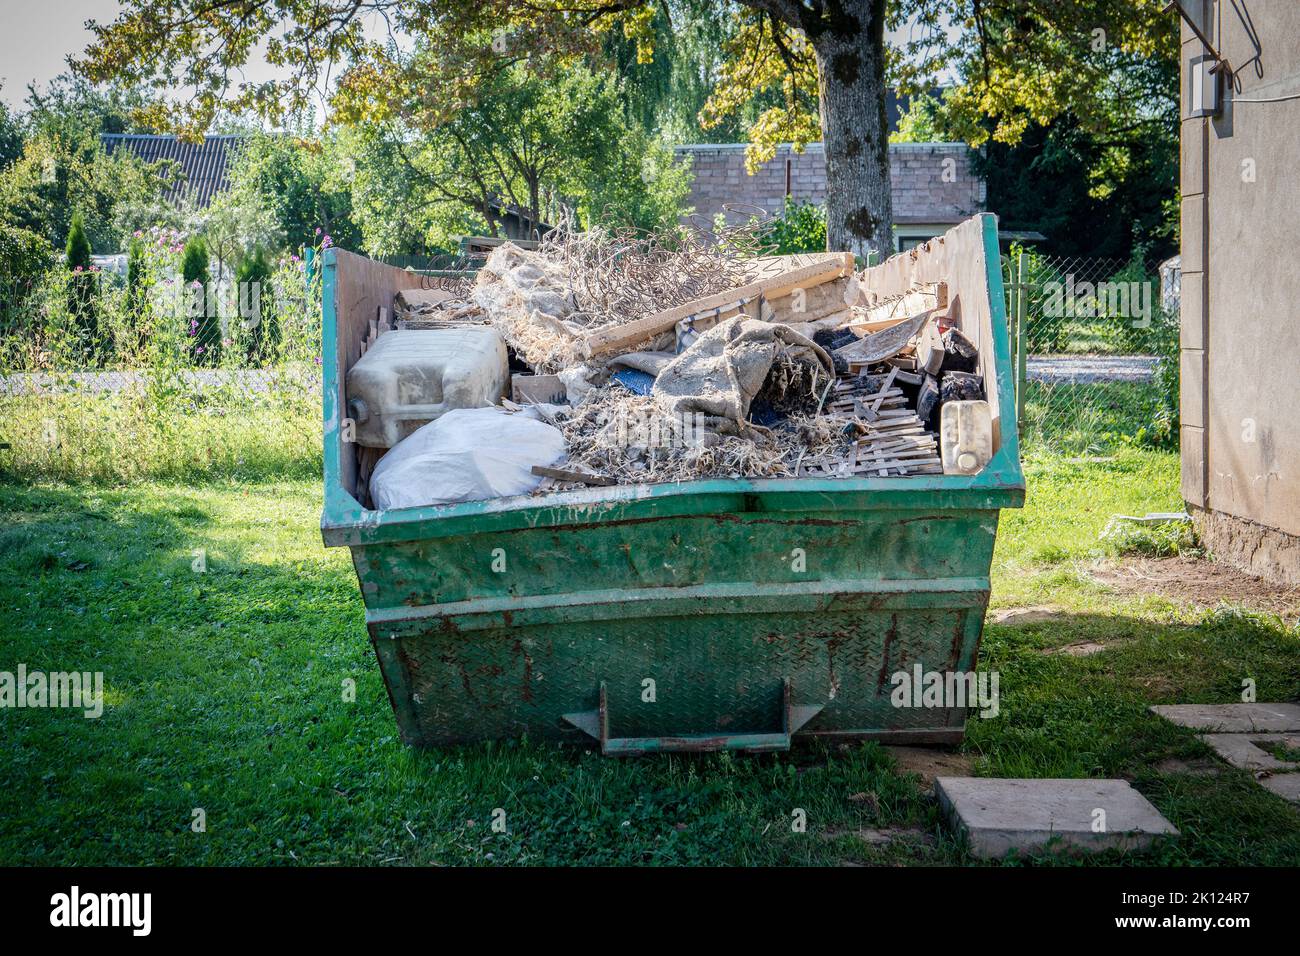 Large container for construction debris and waste. Stock Photo